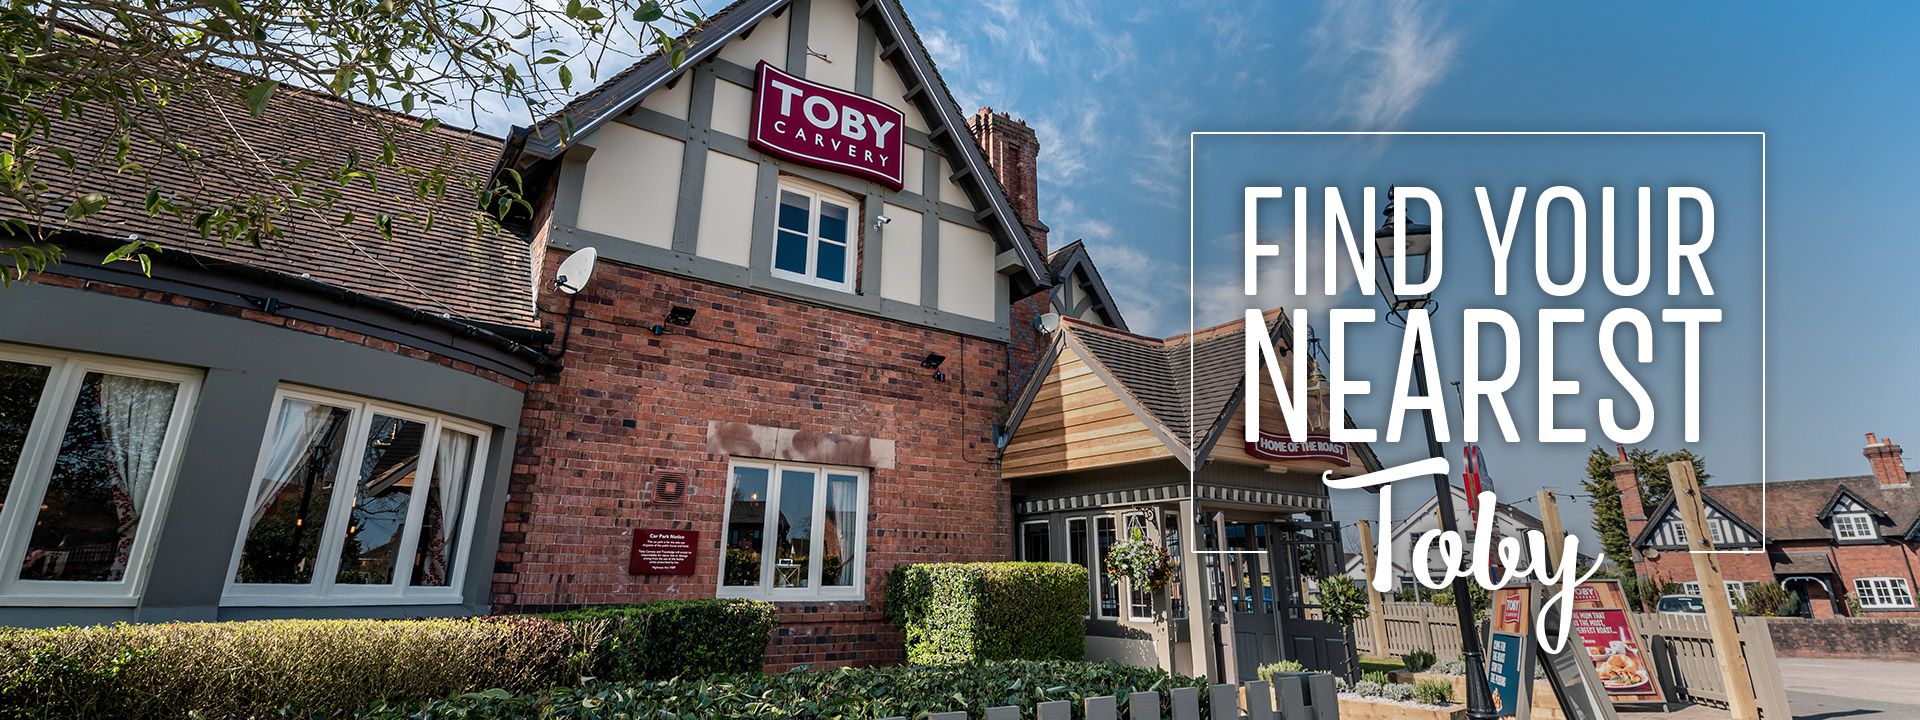 Places To Eat Near E Find a Carvery Near You | Your Local Toby Carvery